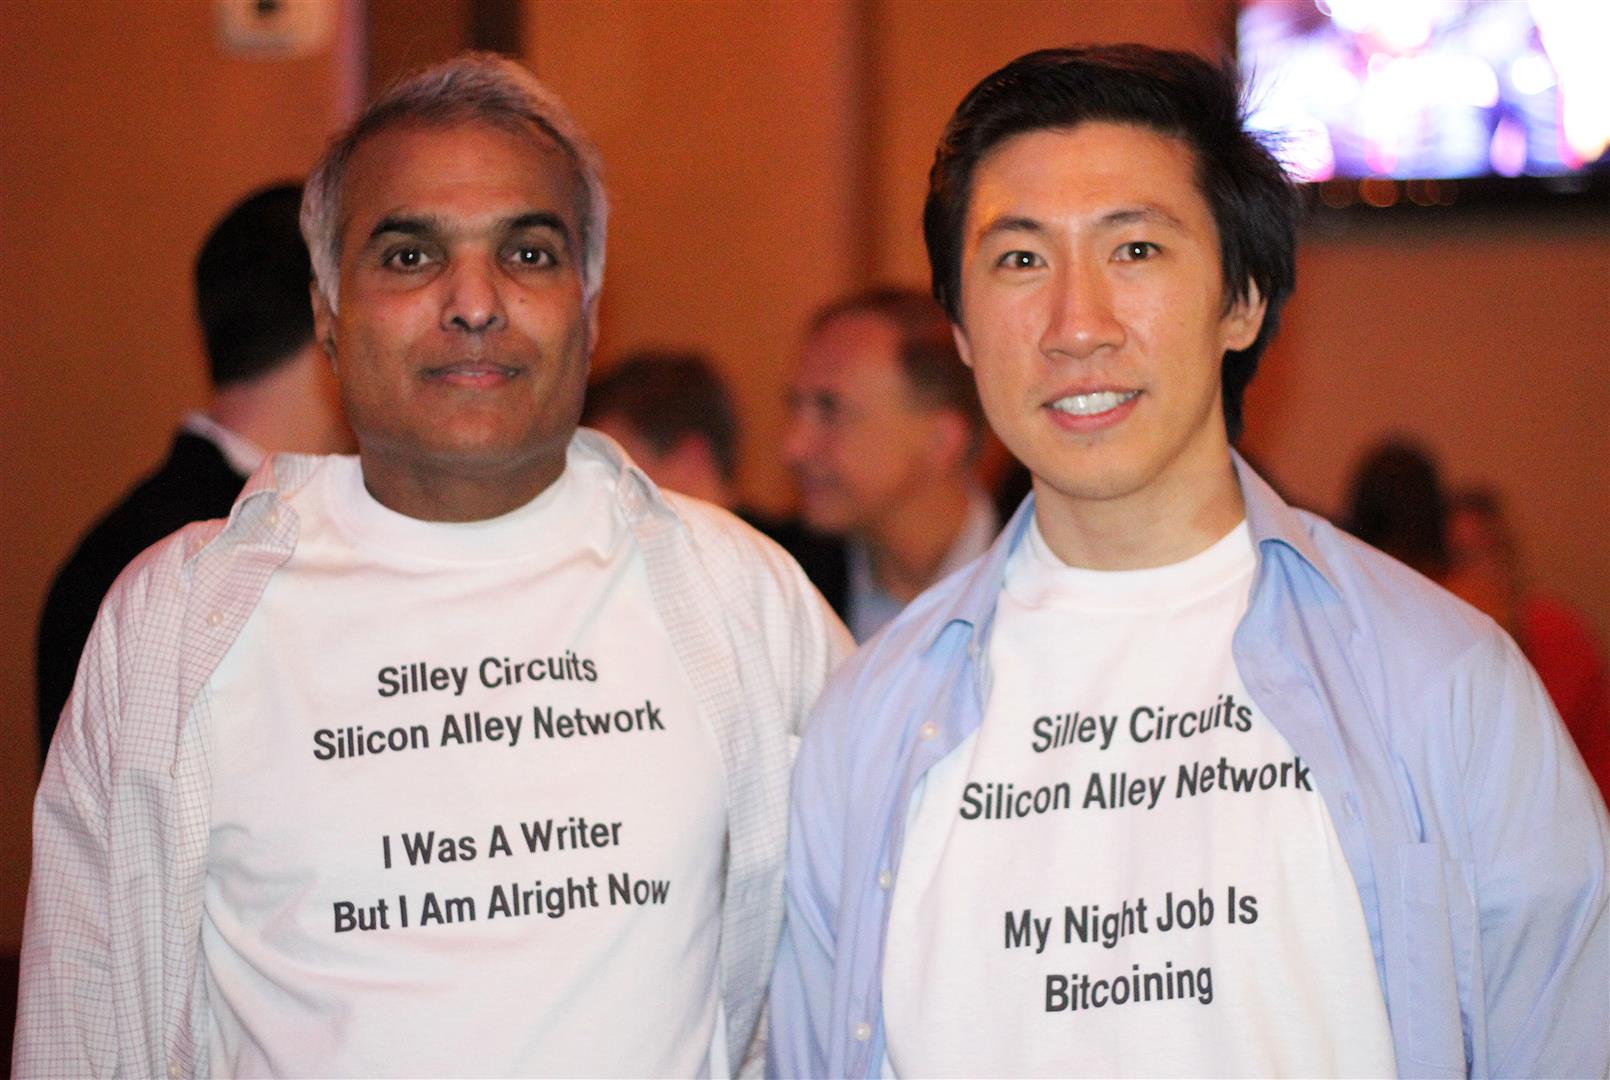 Ignatius Chithelen and Spencer Cheng at West 3rd Common. Silley Circuits: The Silicon Alley Network.